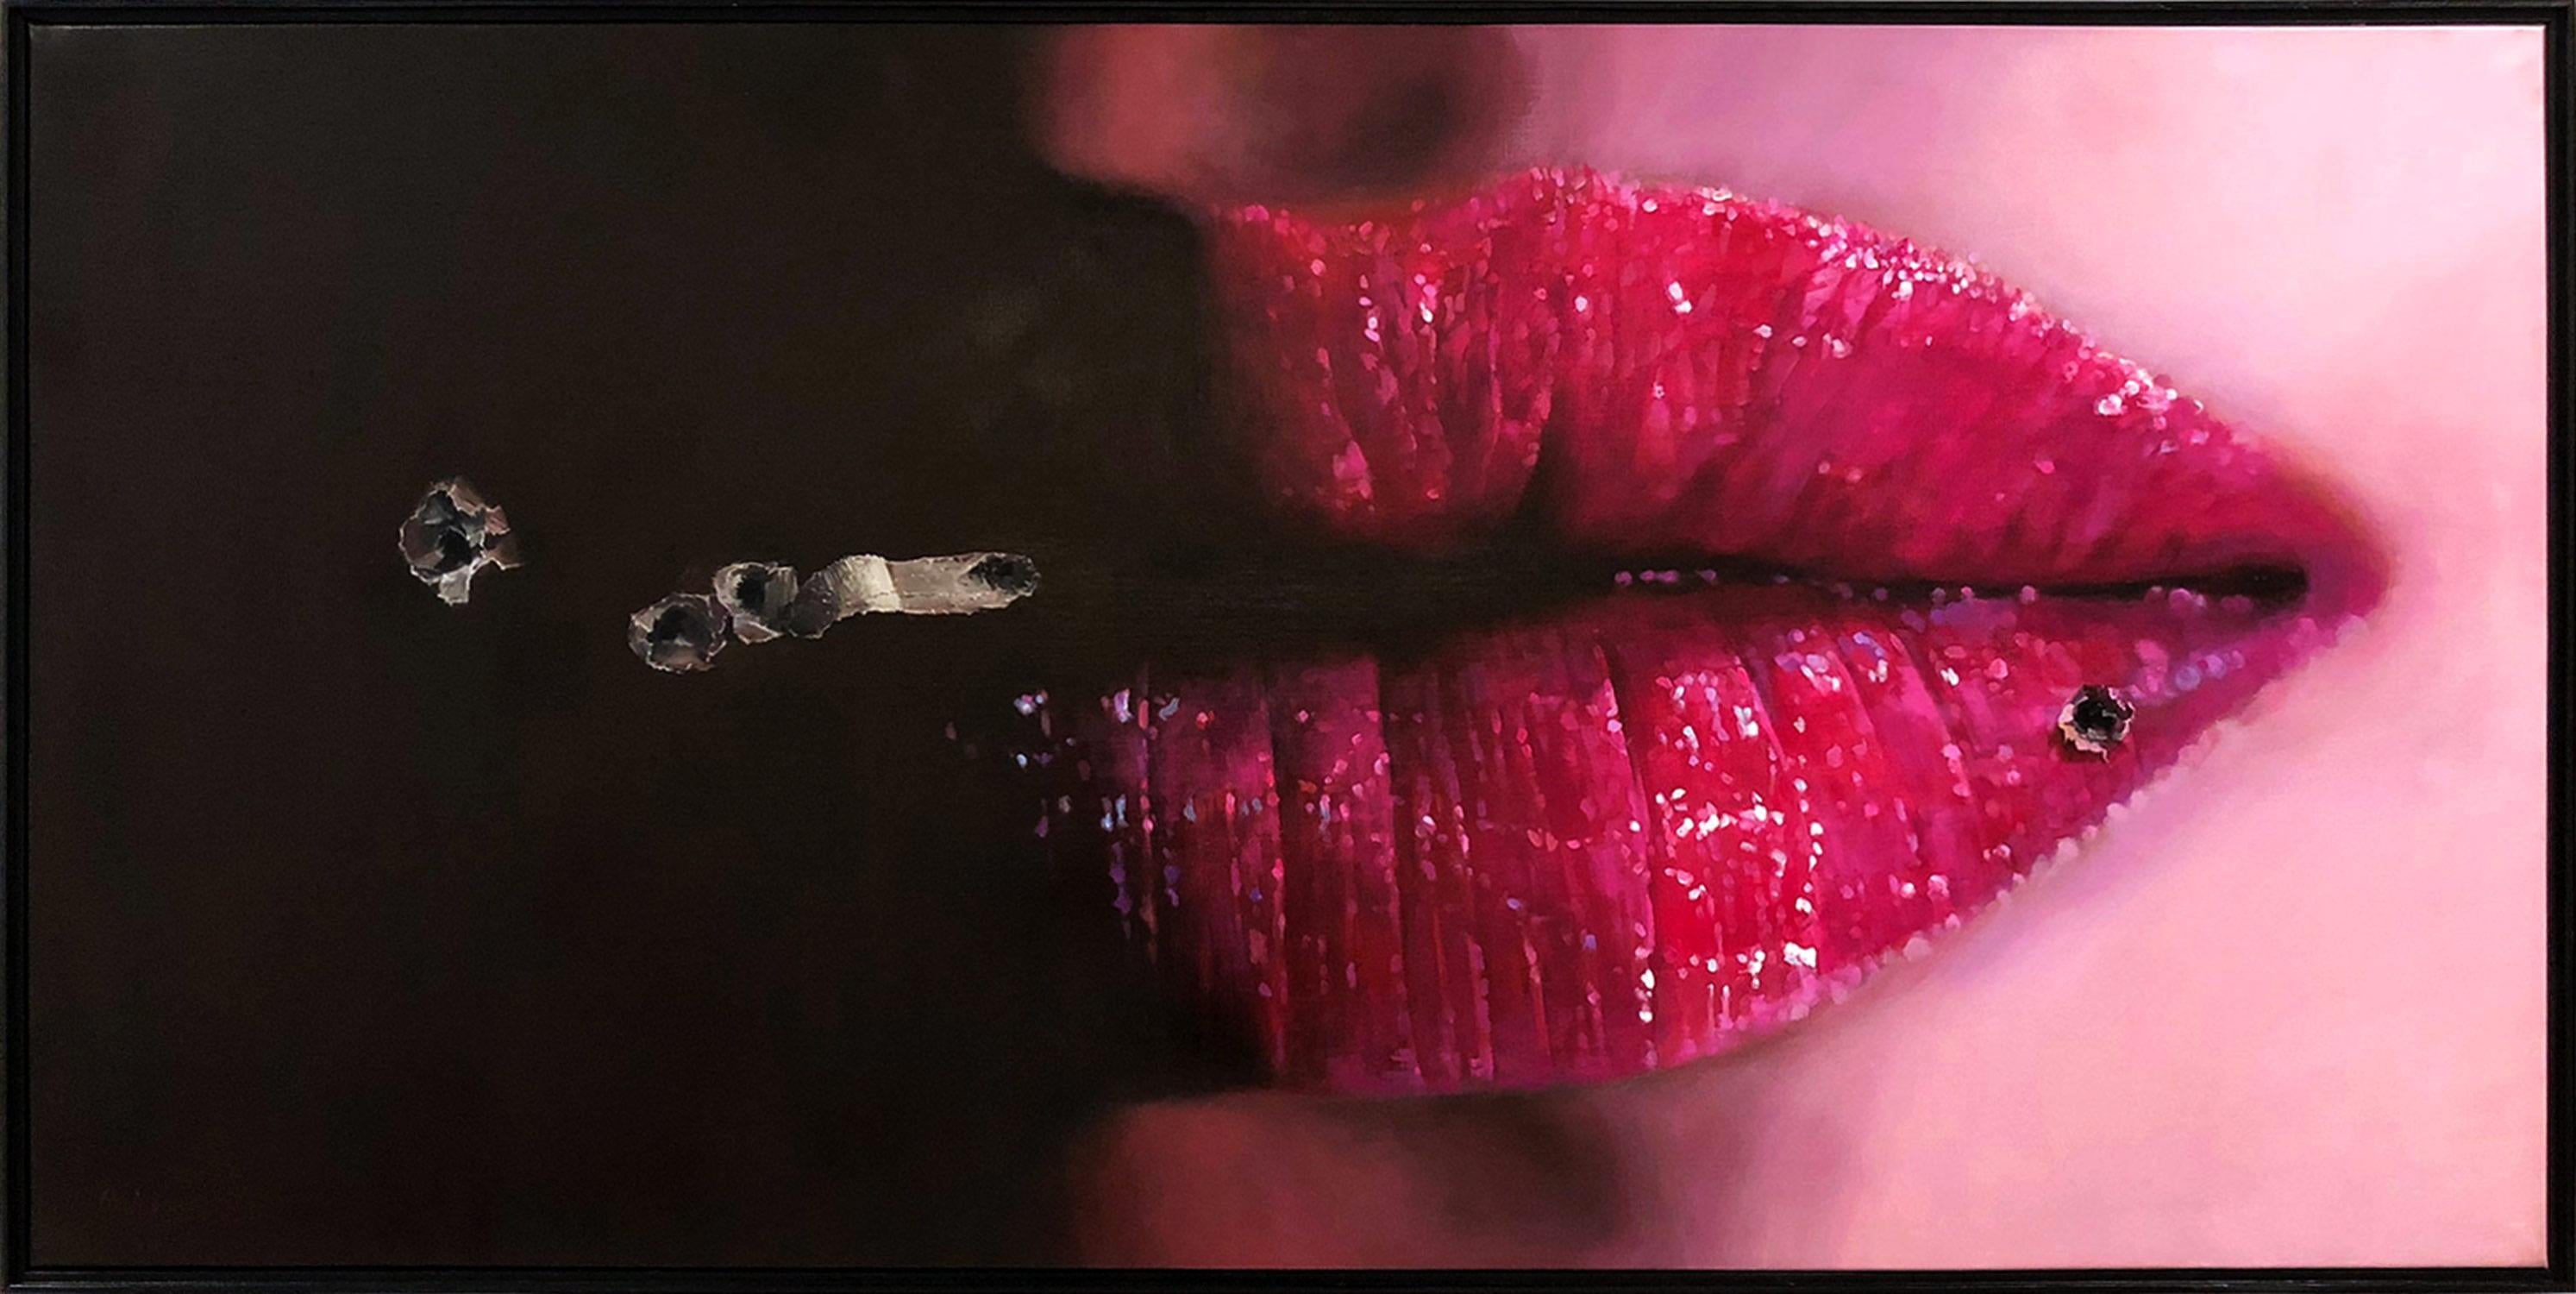 Roh Jae-soon Abstract Painting - "Sound 6616" Lush Woman's Lips & Elements Photorealist Oil Painting on Canvas